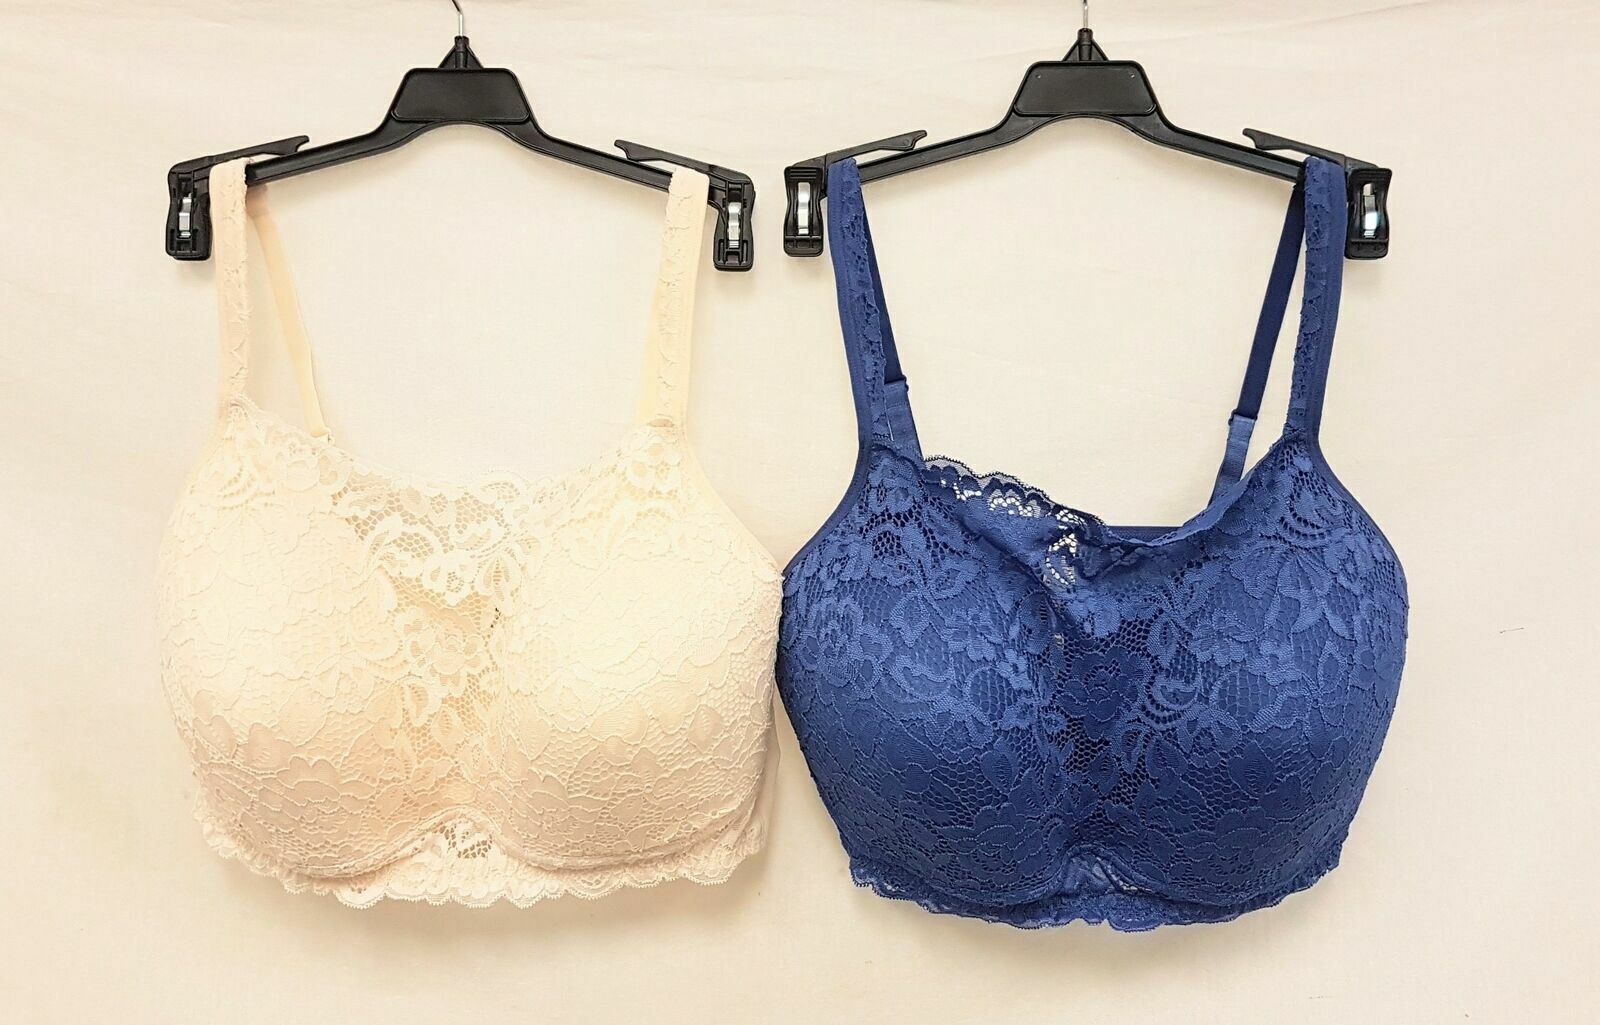 LOT OF 2 Rhonda Shear #9340 Molded Cup Bra with Lace Detail Front, NAVY & CREAM